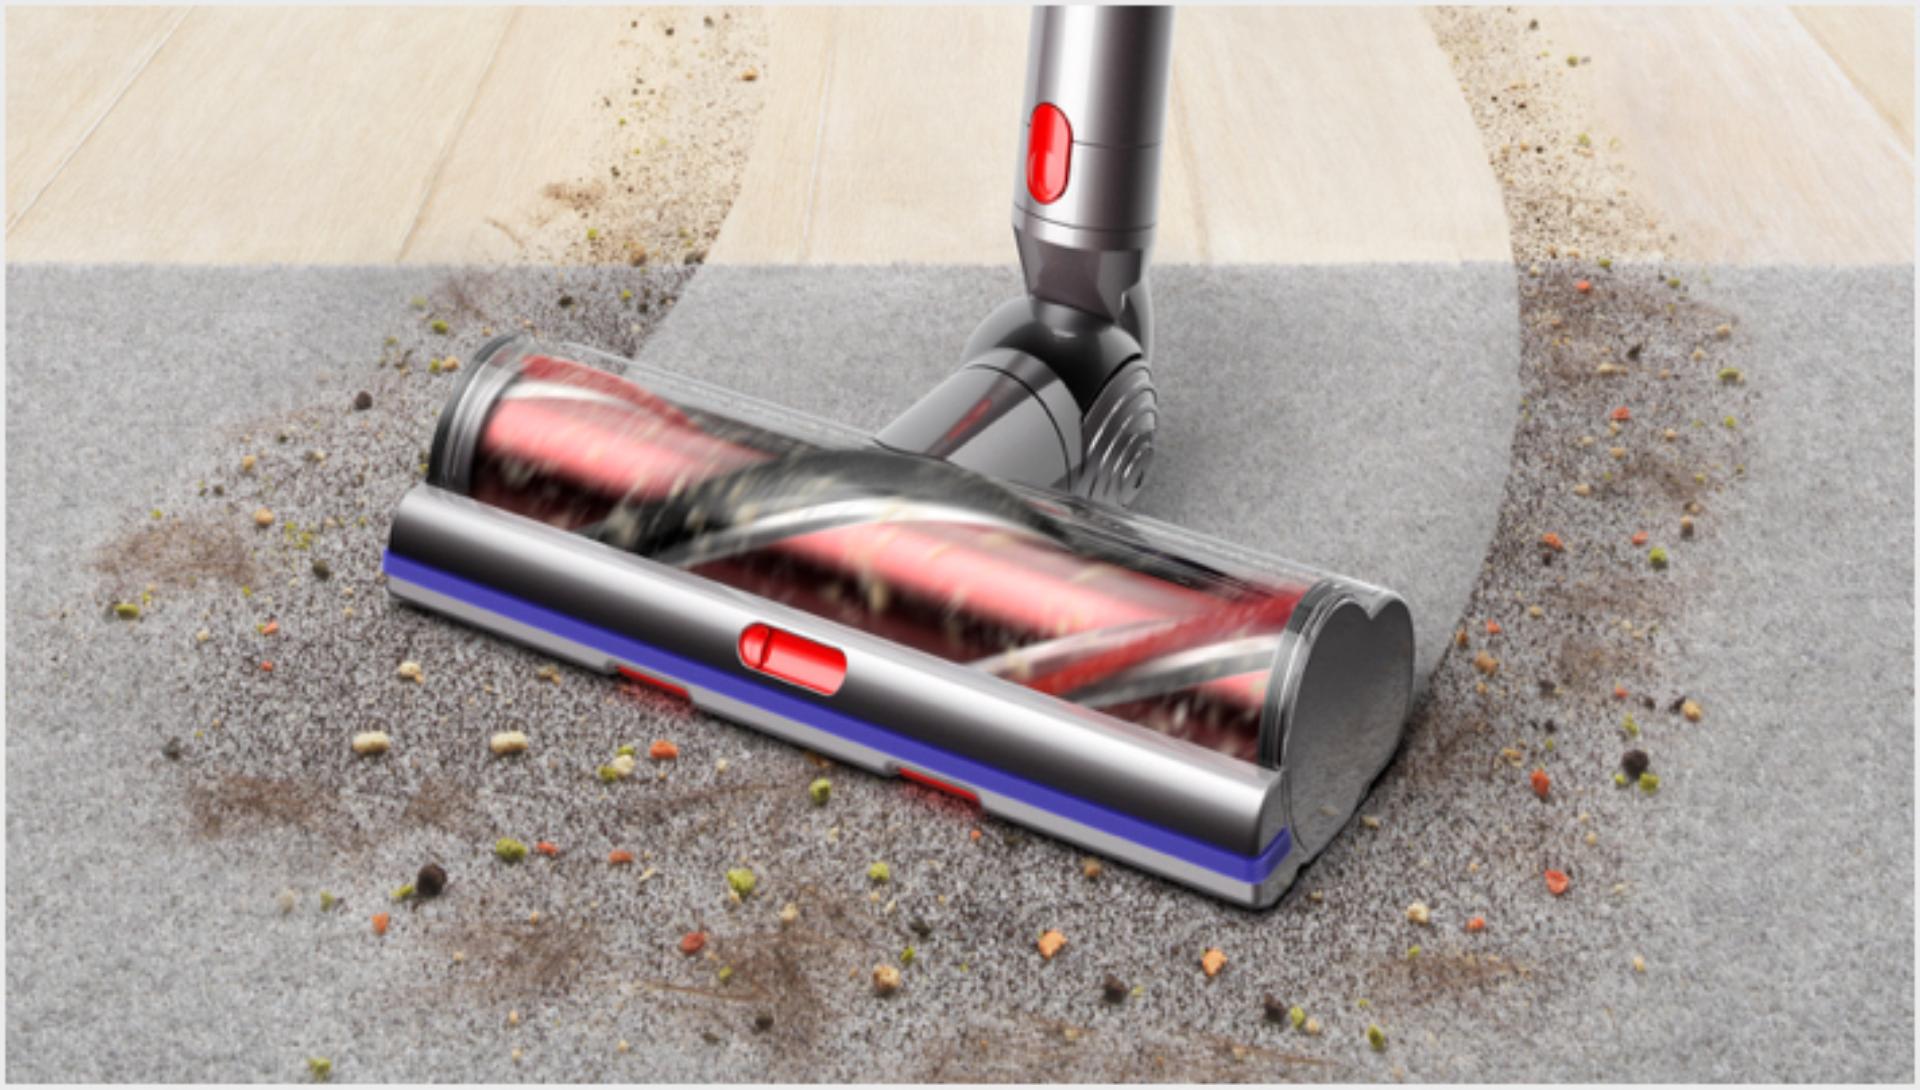 High Torque cleaner head cleaning different floor surfaces